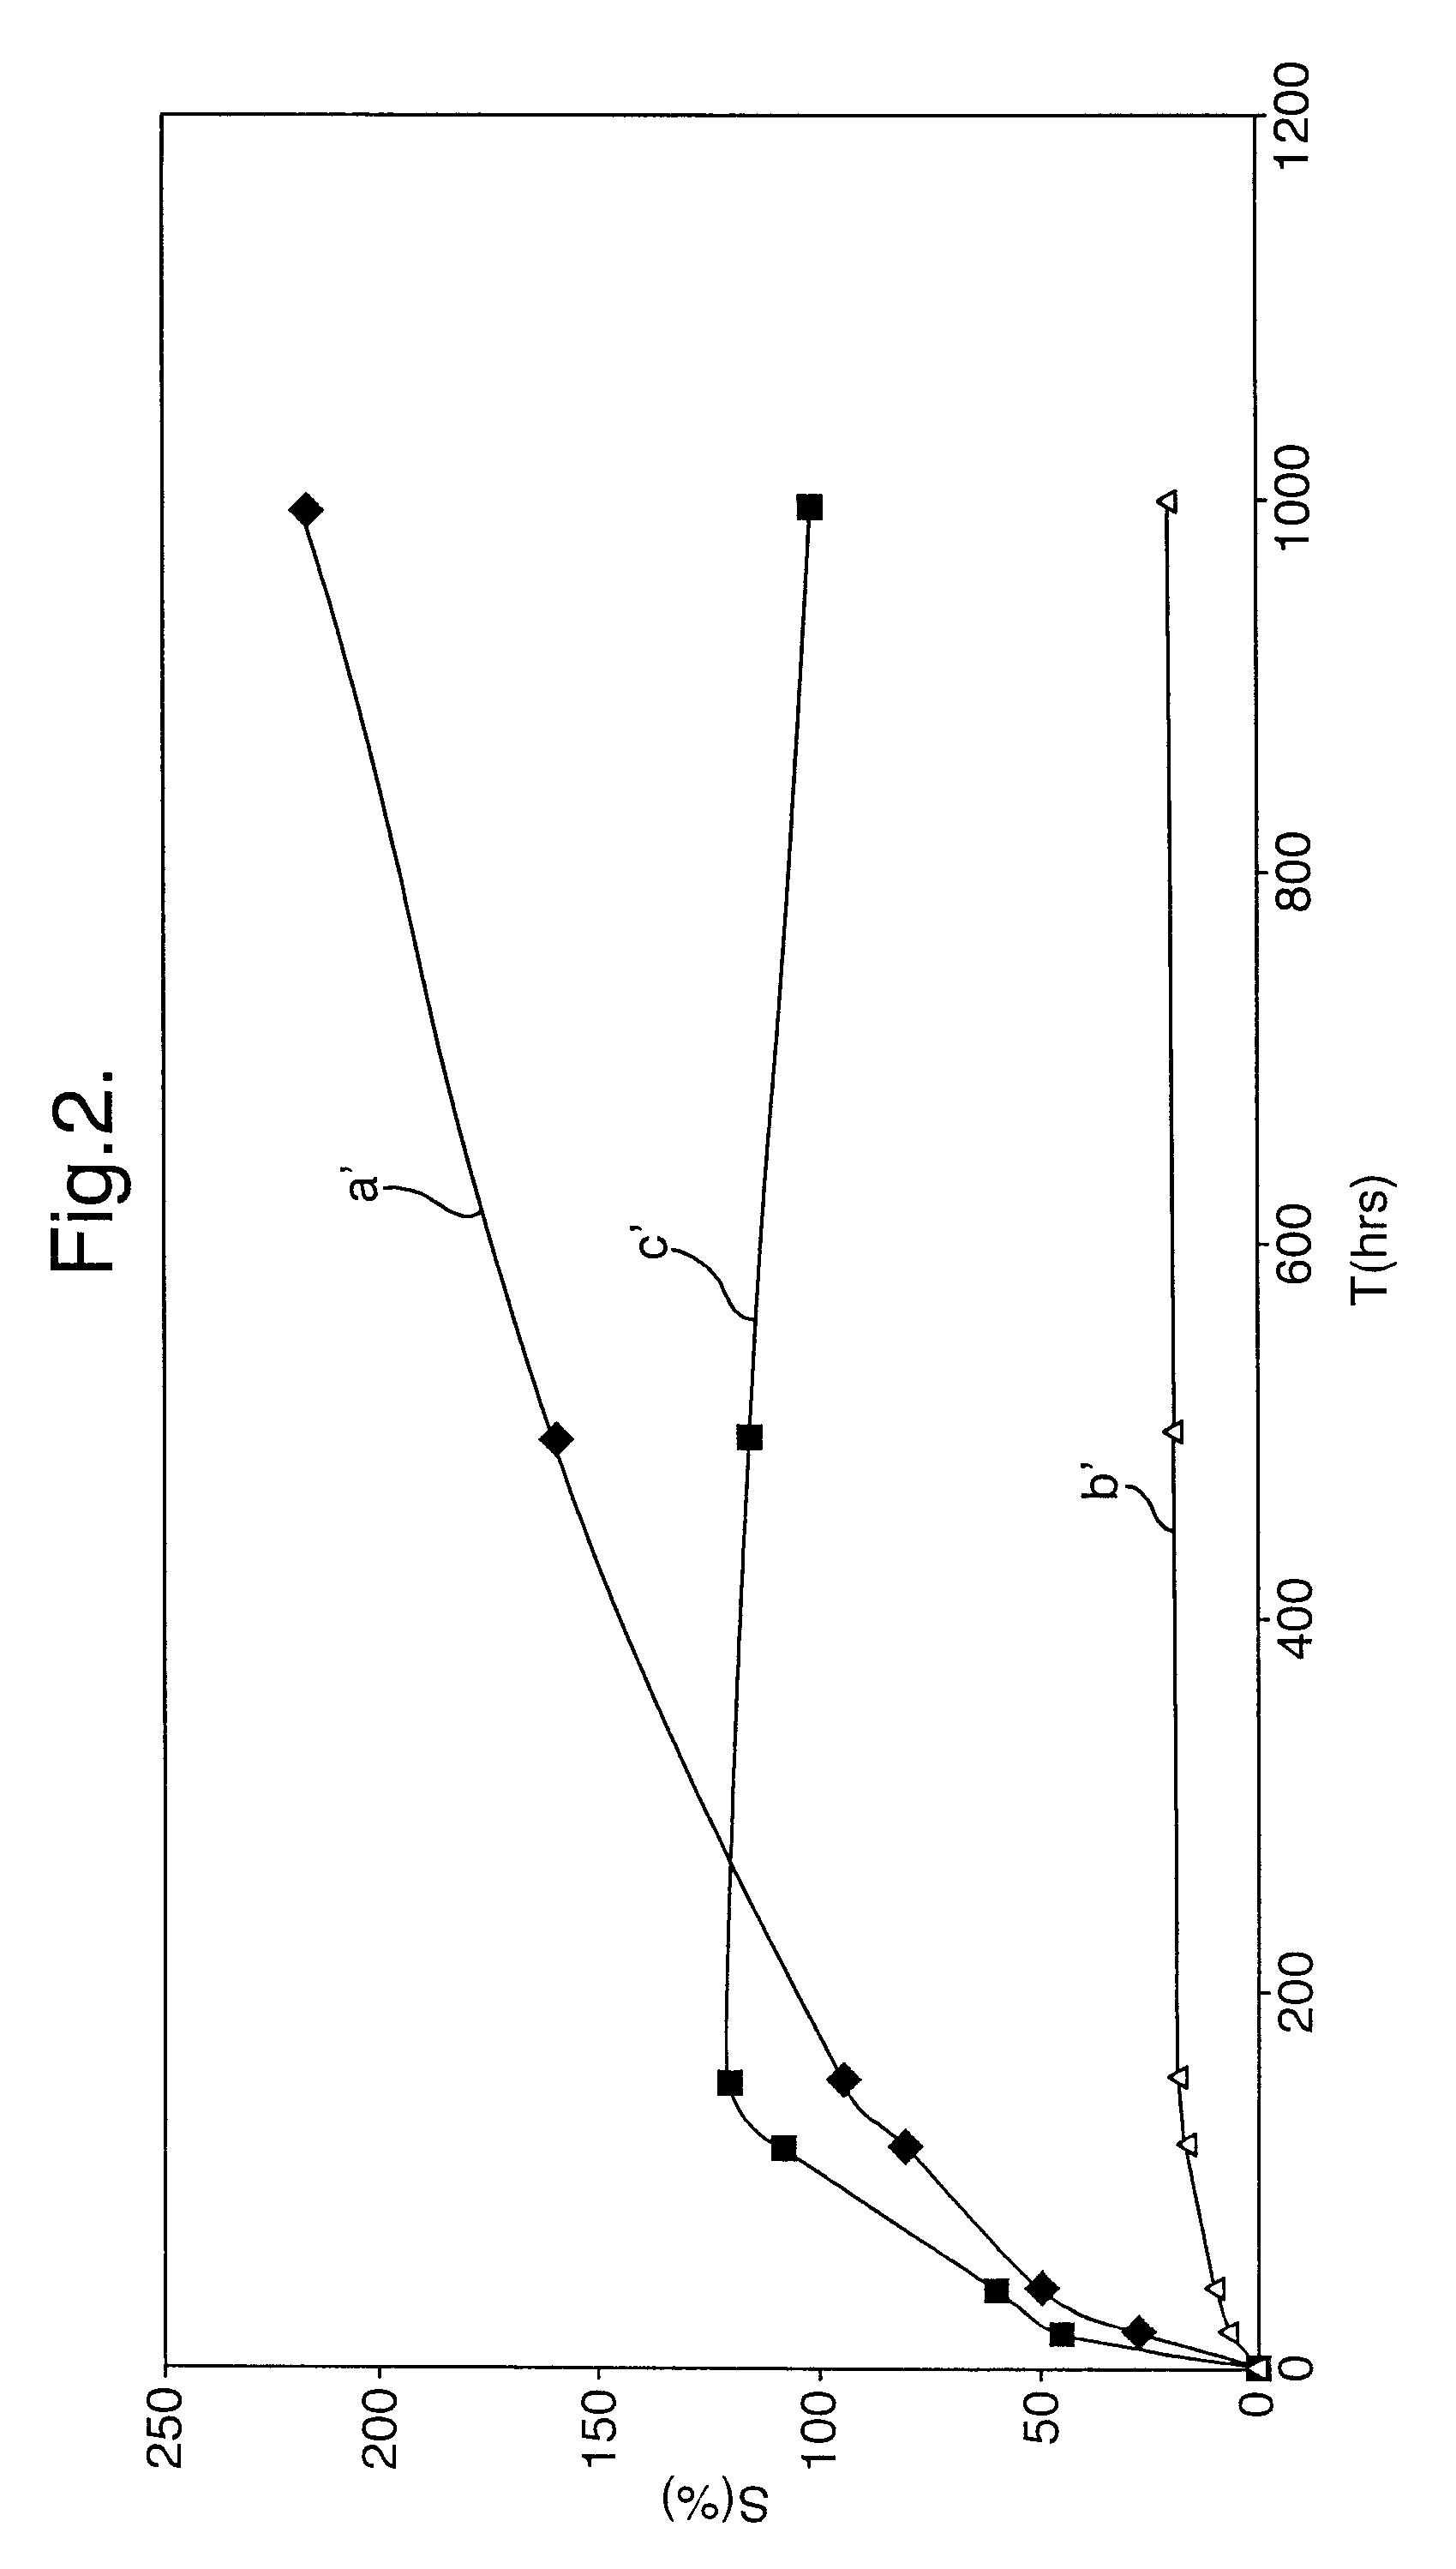 Method of sealing an annular space in a wellbore